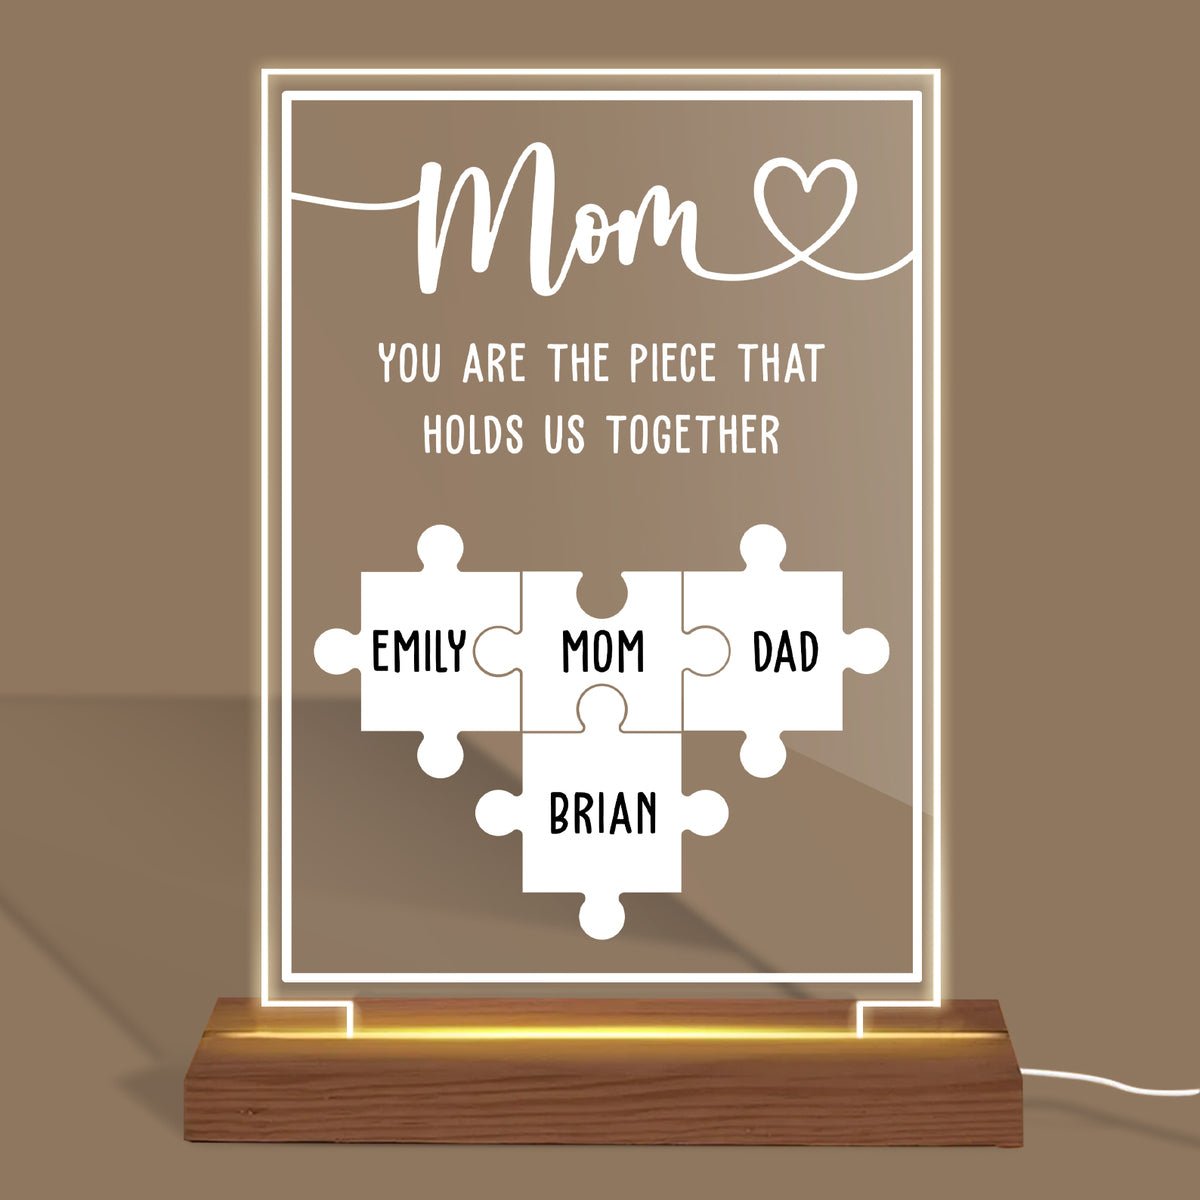 https://cdn.shopify.com/s/files/1/0640/1861/2460/products/mom-you-are-the-piece-that-hold-us-together-personalized-led-lamp-best-gift-for-mother-430727_1600x.jpg?v=1681288835